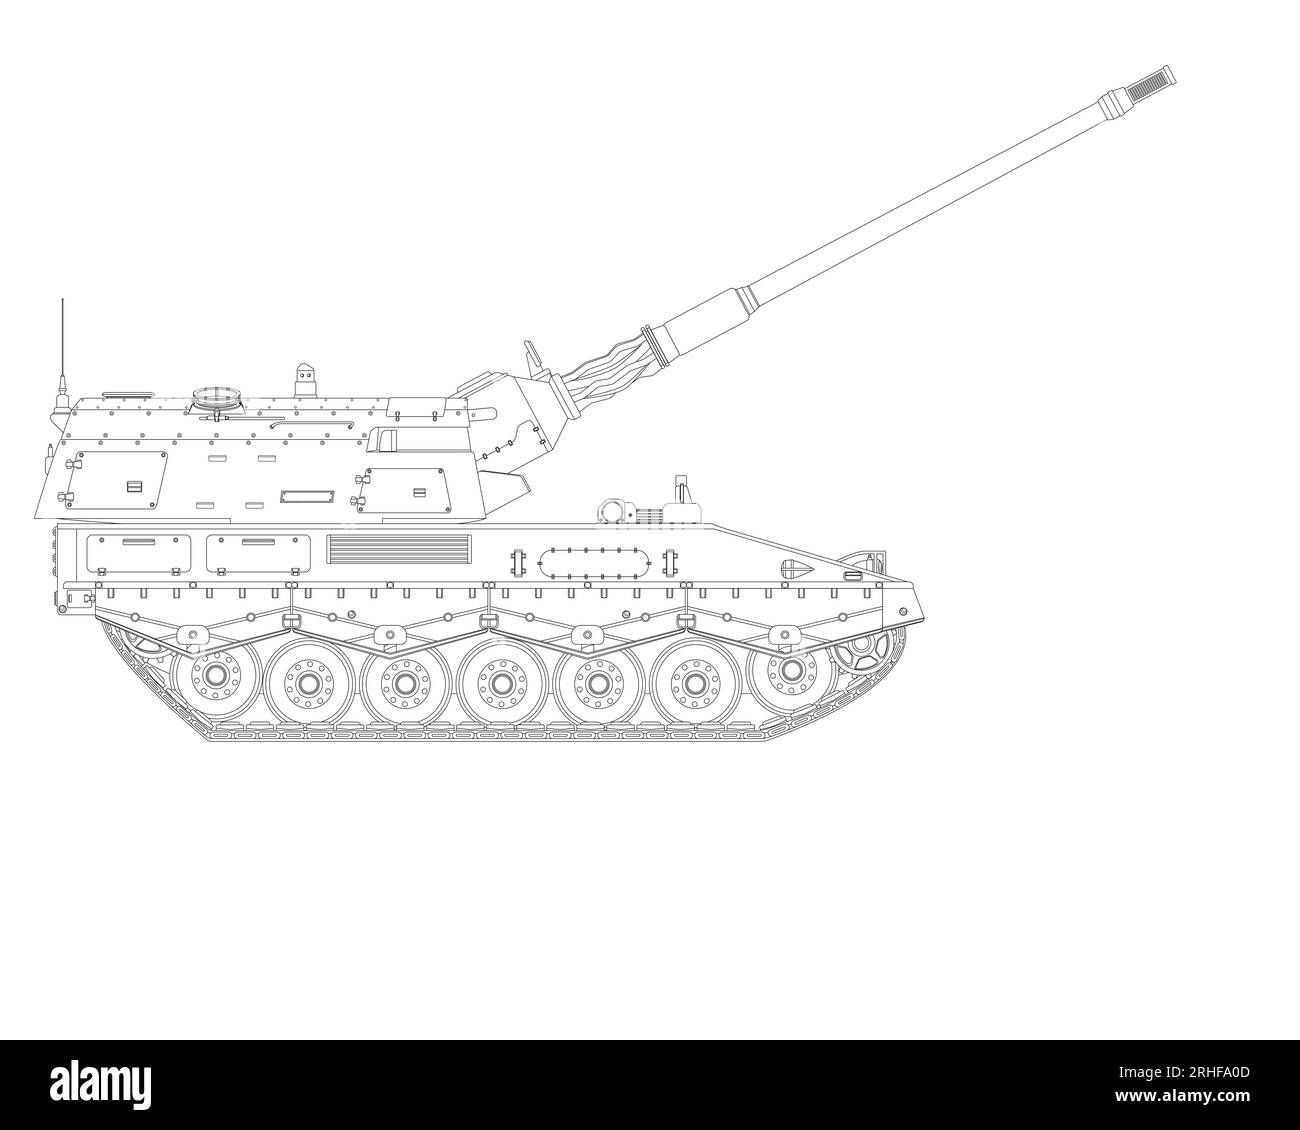 Self-propelled howitzer in line art. Raised barrel. Military armored vehicle. Detailed illustration isolated on white background. Stock Photo